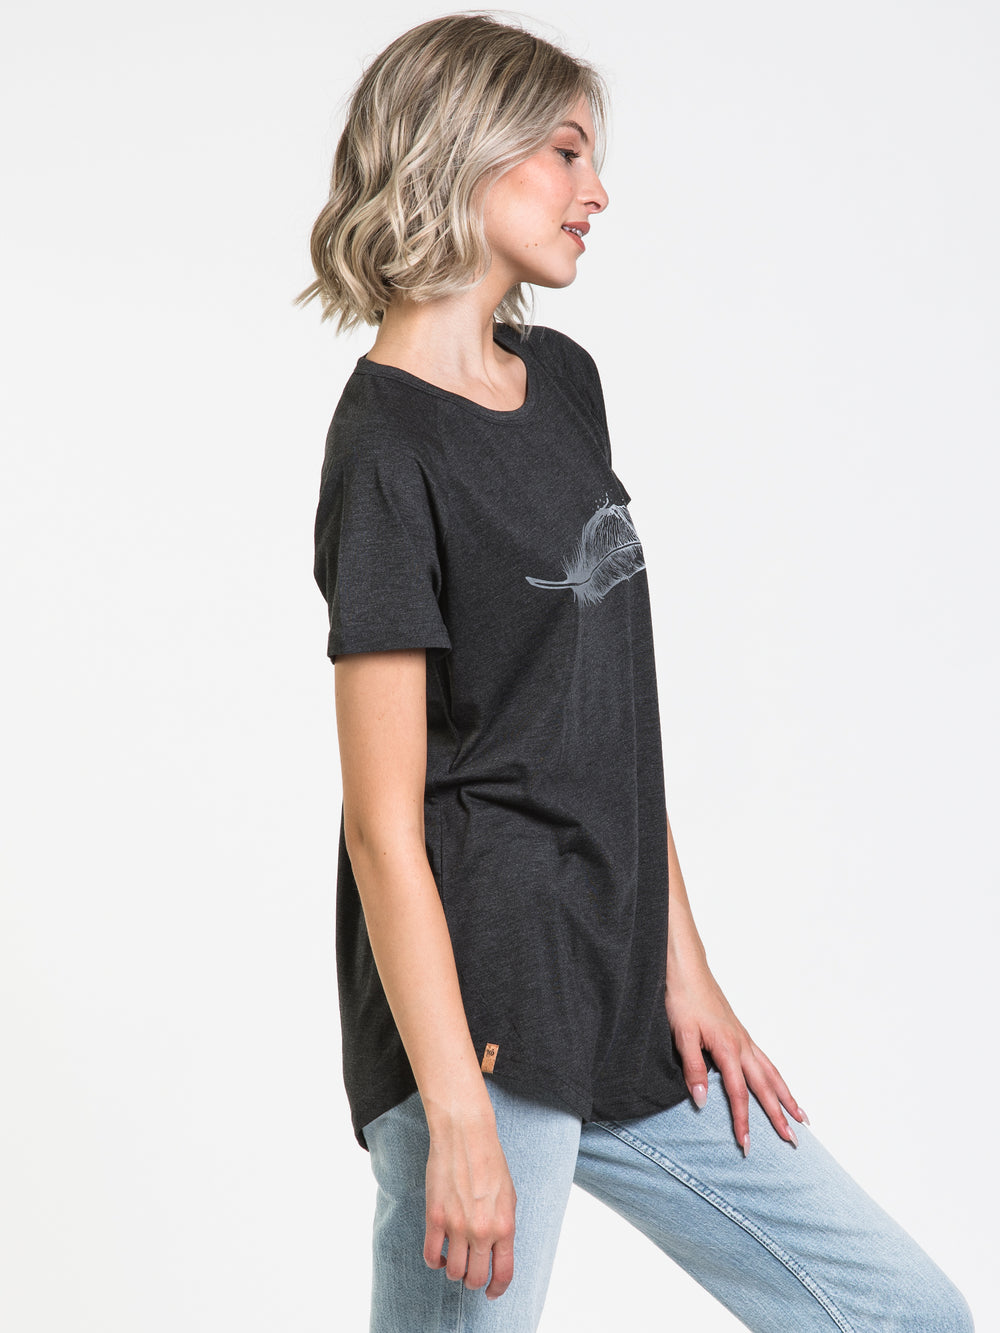 TENTREE FEATHERWEAVE LOGO T-SHIRT - CLEARANCE